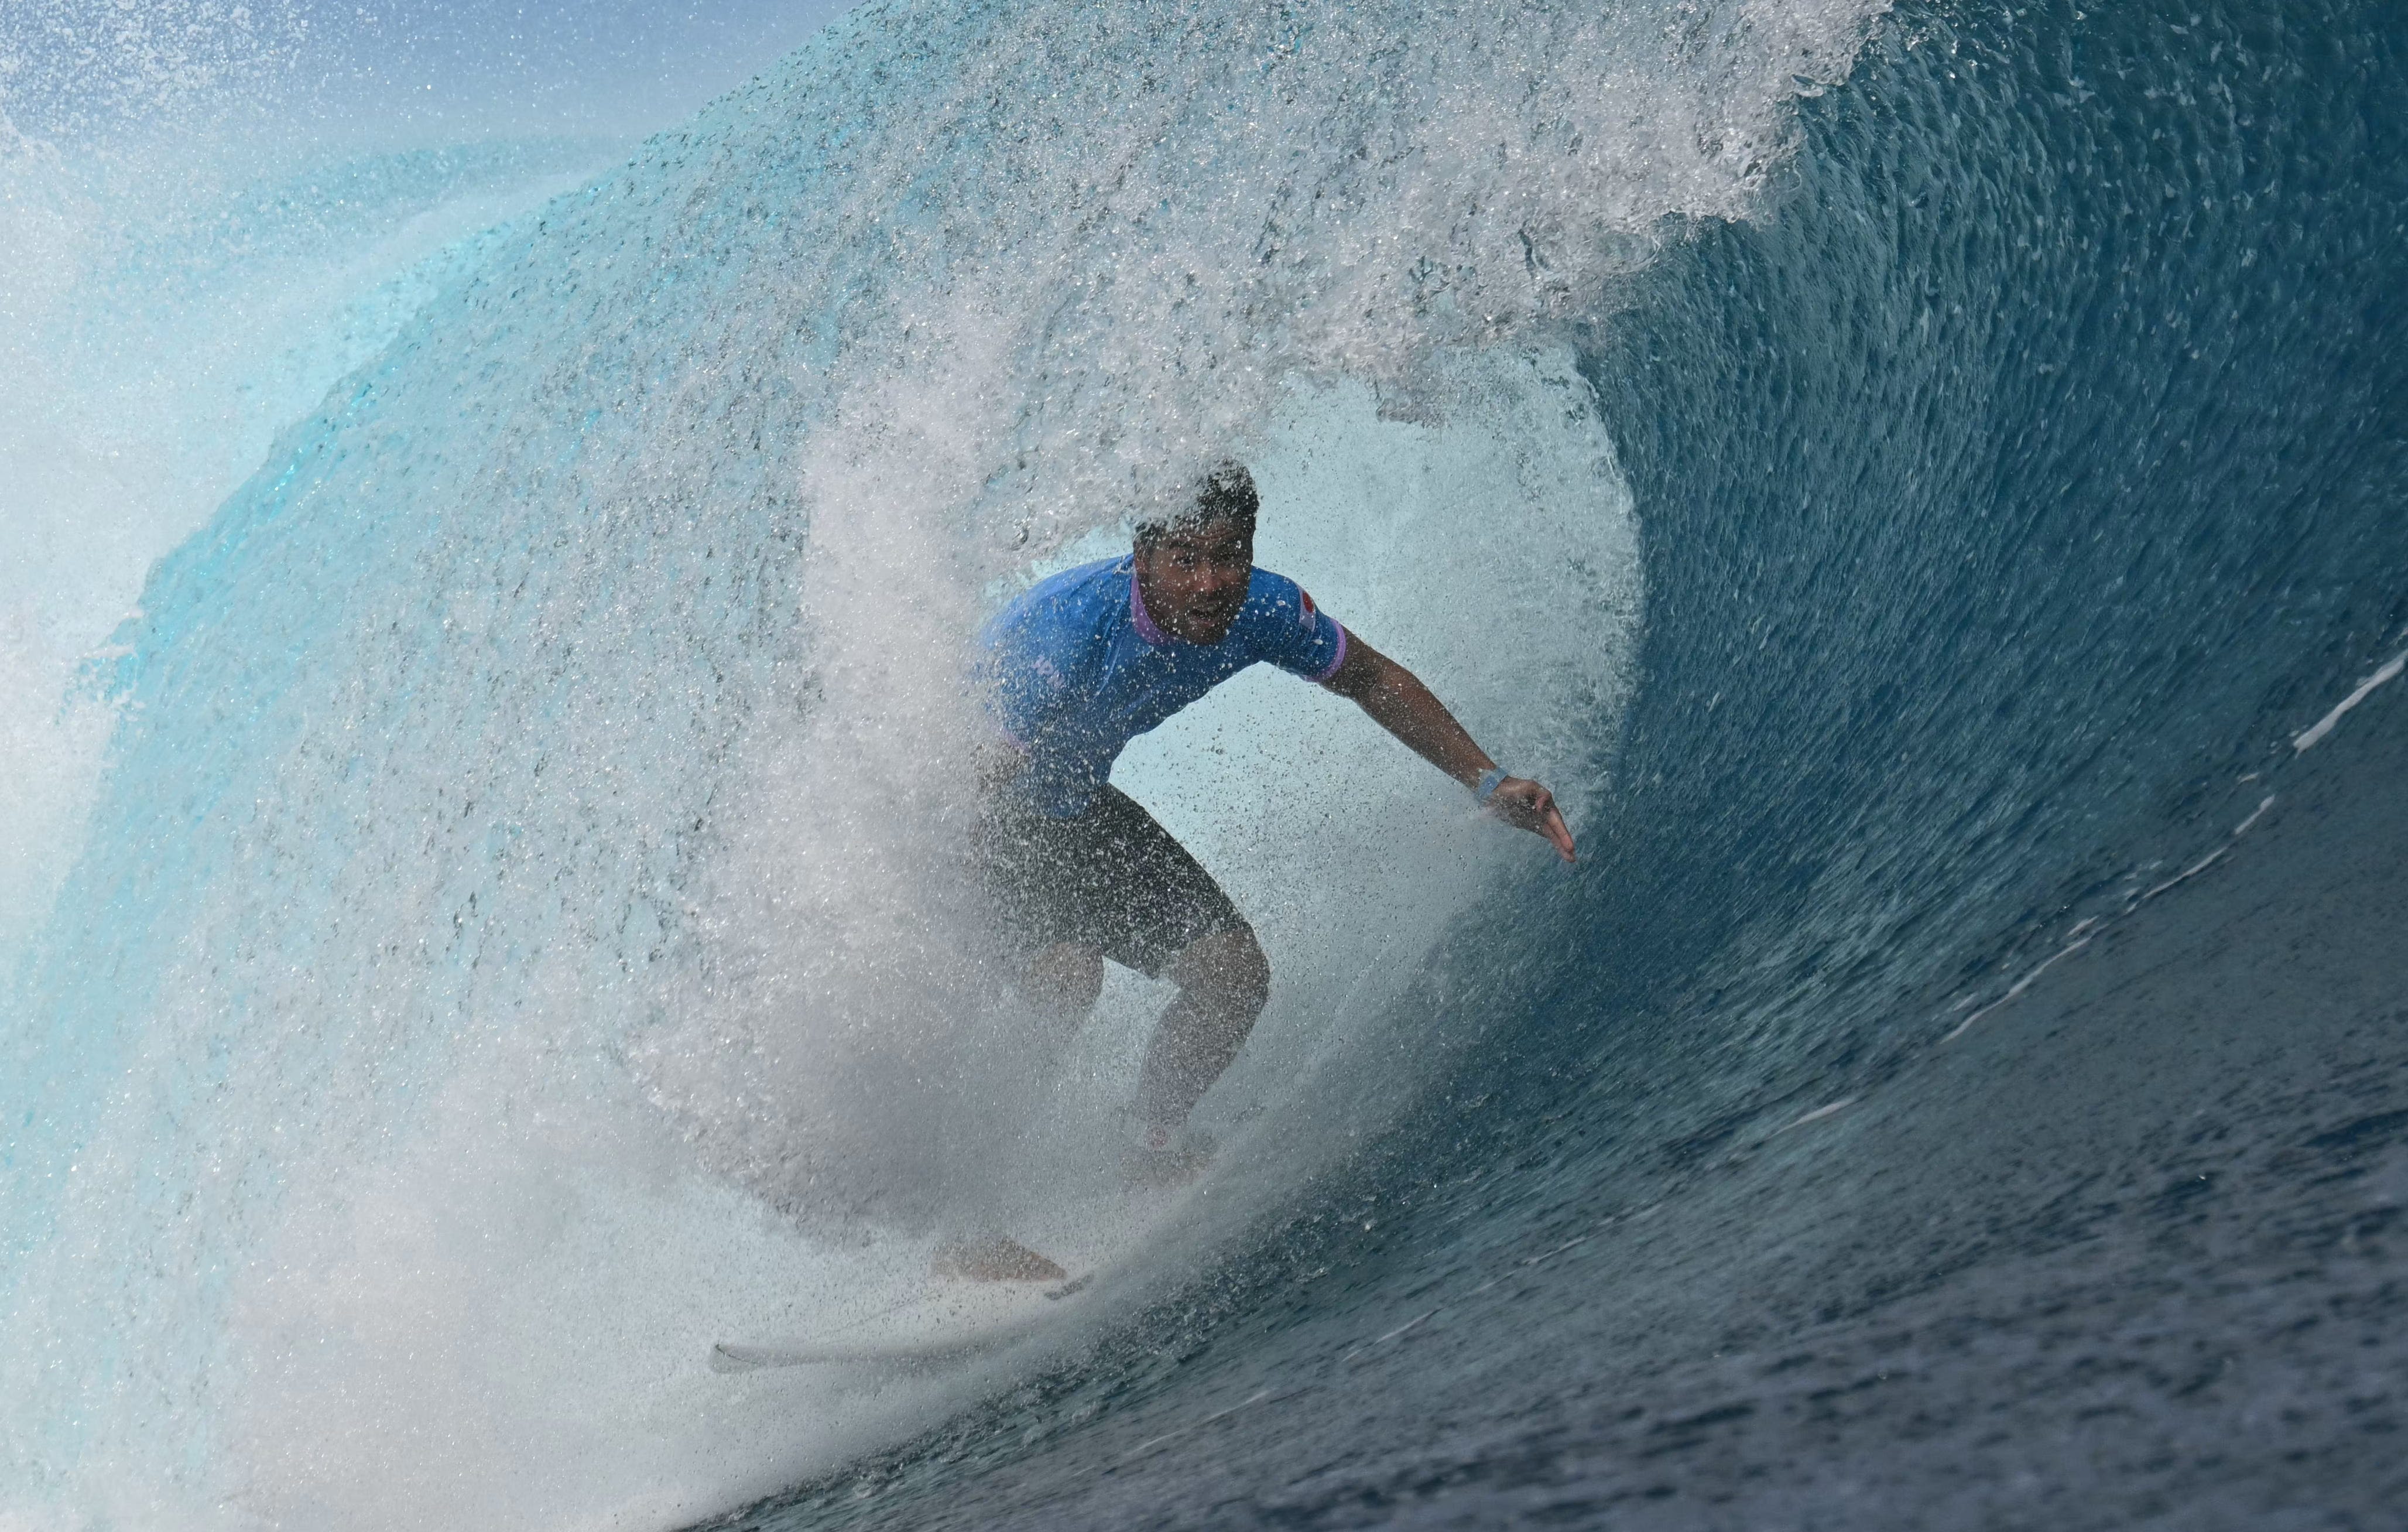 Olympics surfing winners today: Who advanced Thursday in the 2024 Paris Games in Tahiti?